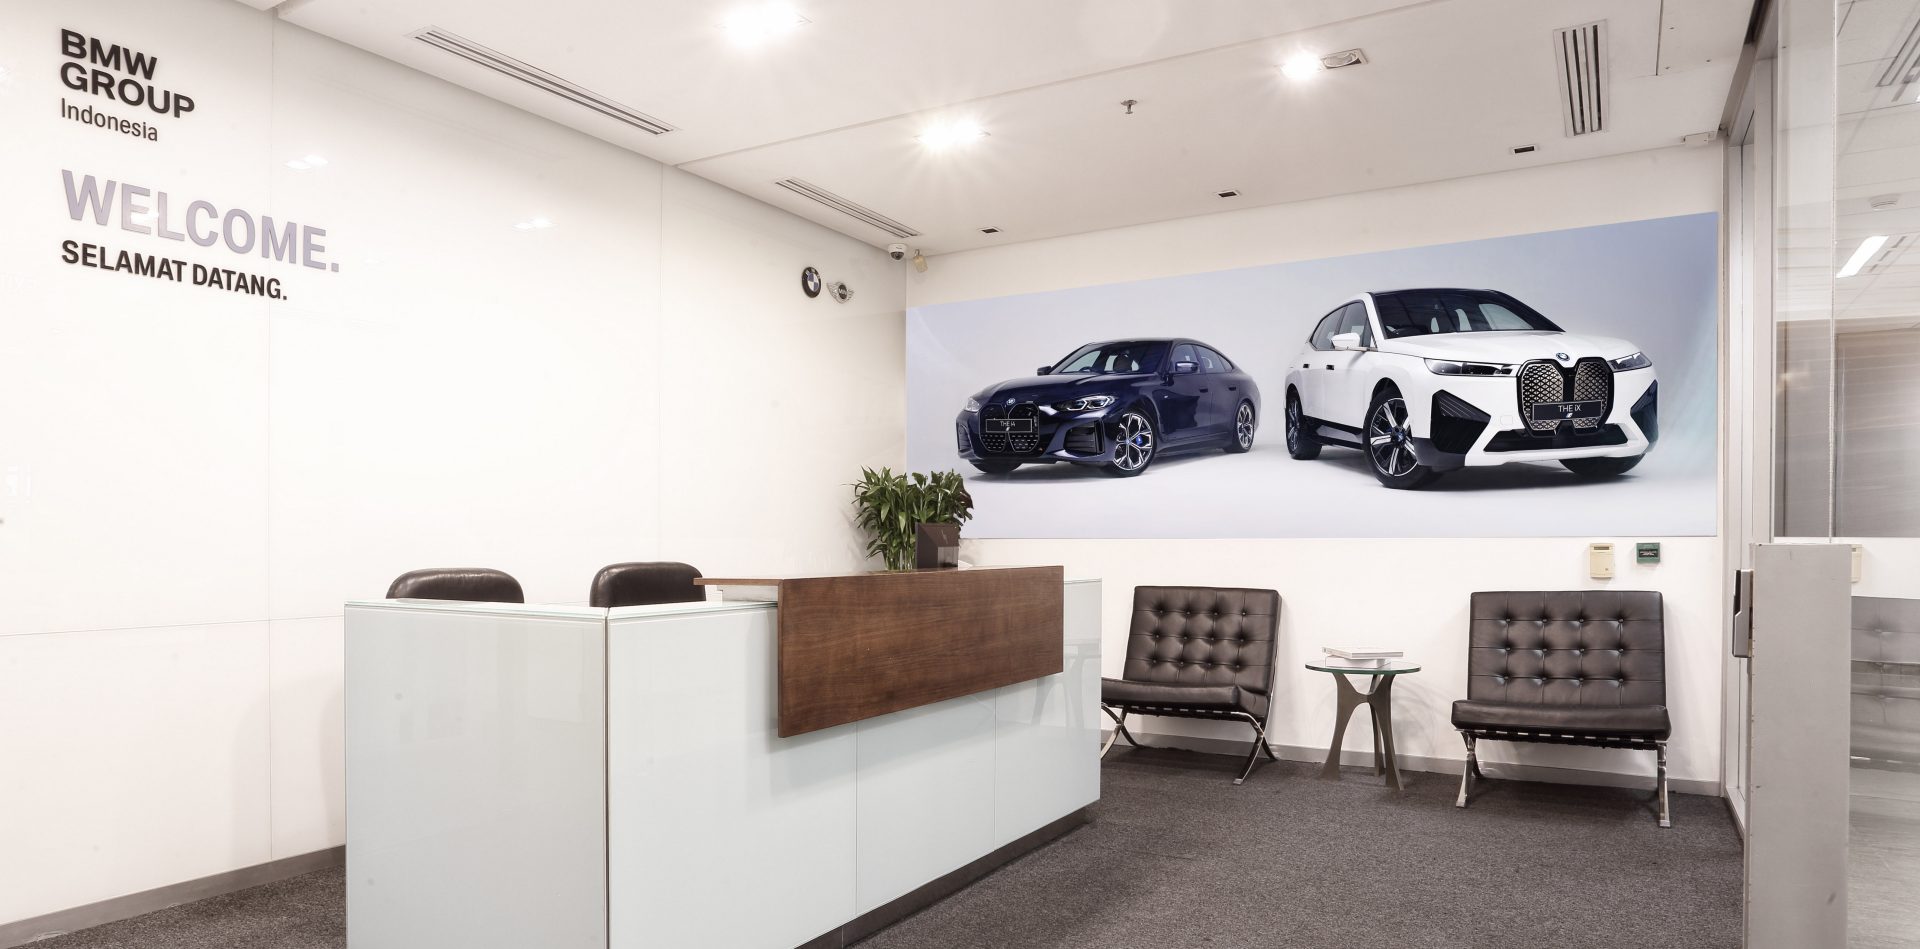 This picture shows an interior view of the BMW Group Indonesia